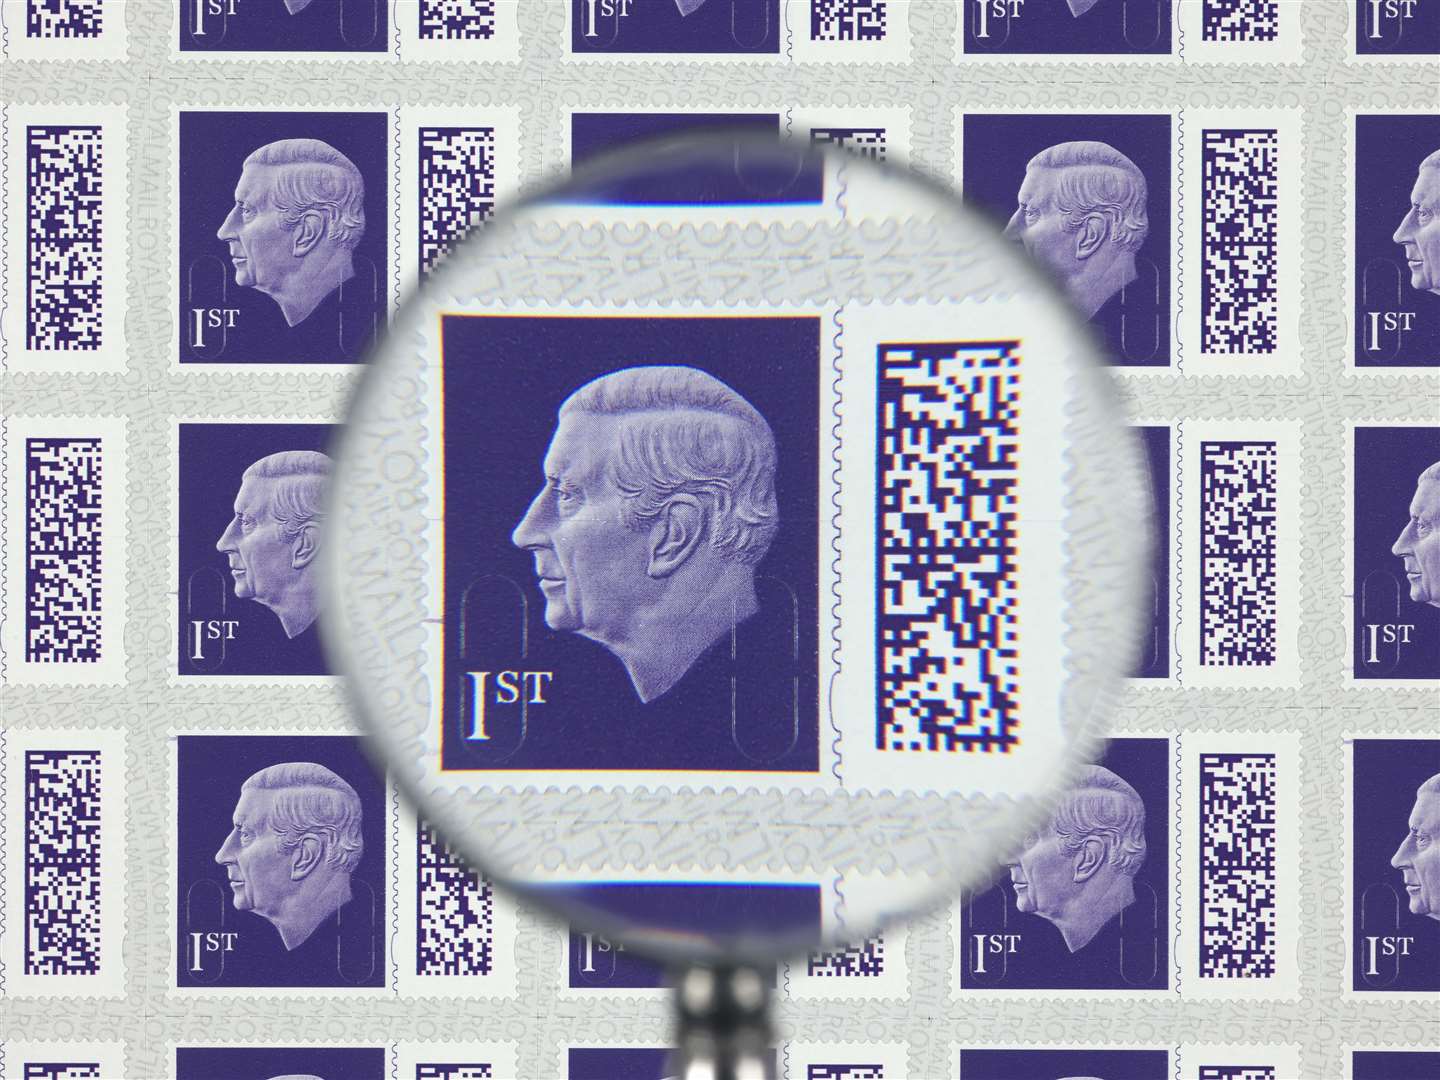 An image of the King Charles III 1st Class stamp